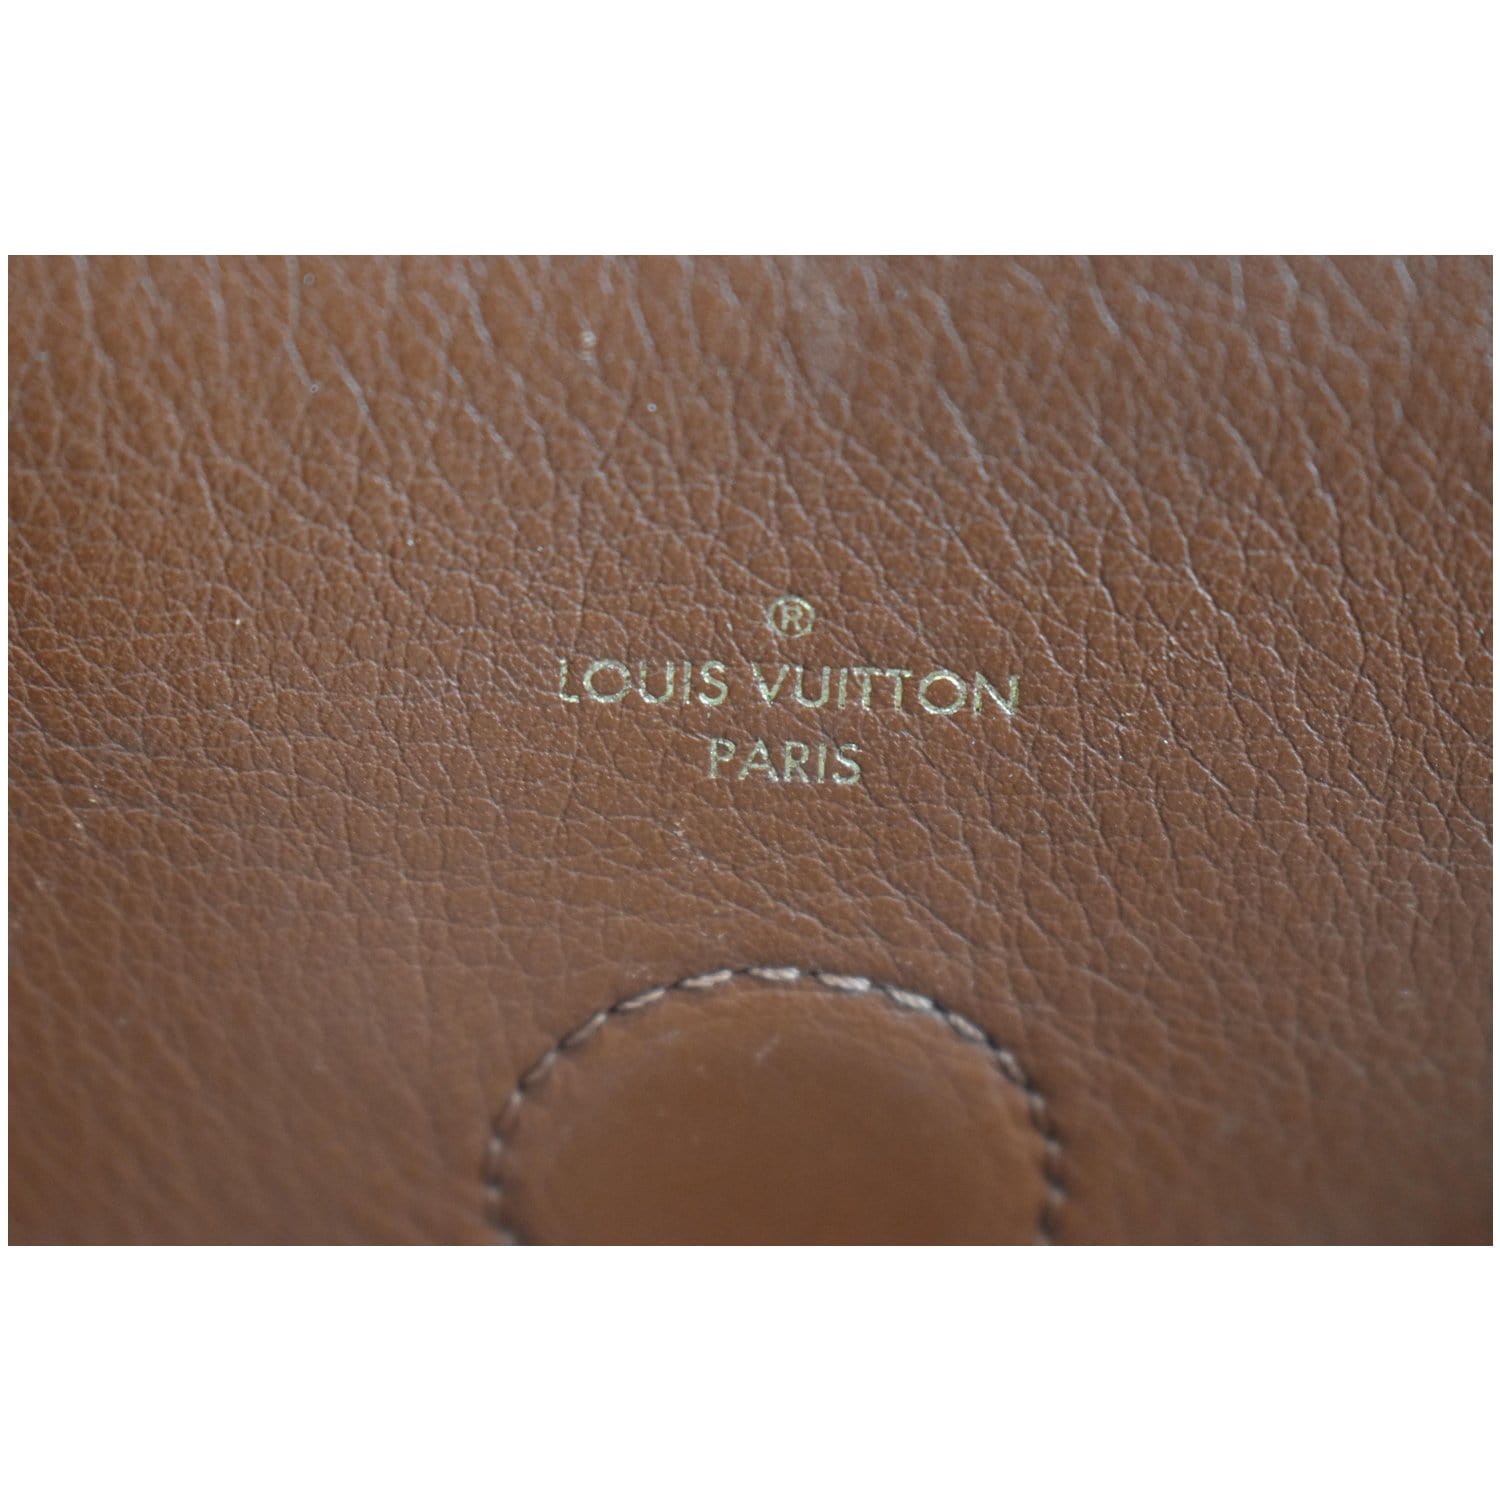 BANANANINA - Looking effortlessly elegant with the versatile Tuileries  Louis Vuitton Monogram Tuileries Caramel Noir 🔎716457 / 65646 For order  and details please contact by WhatsApp to 08118997459 or visit  www.banananina.co.id Item(s)